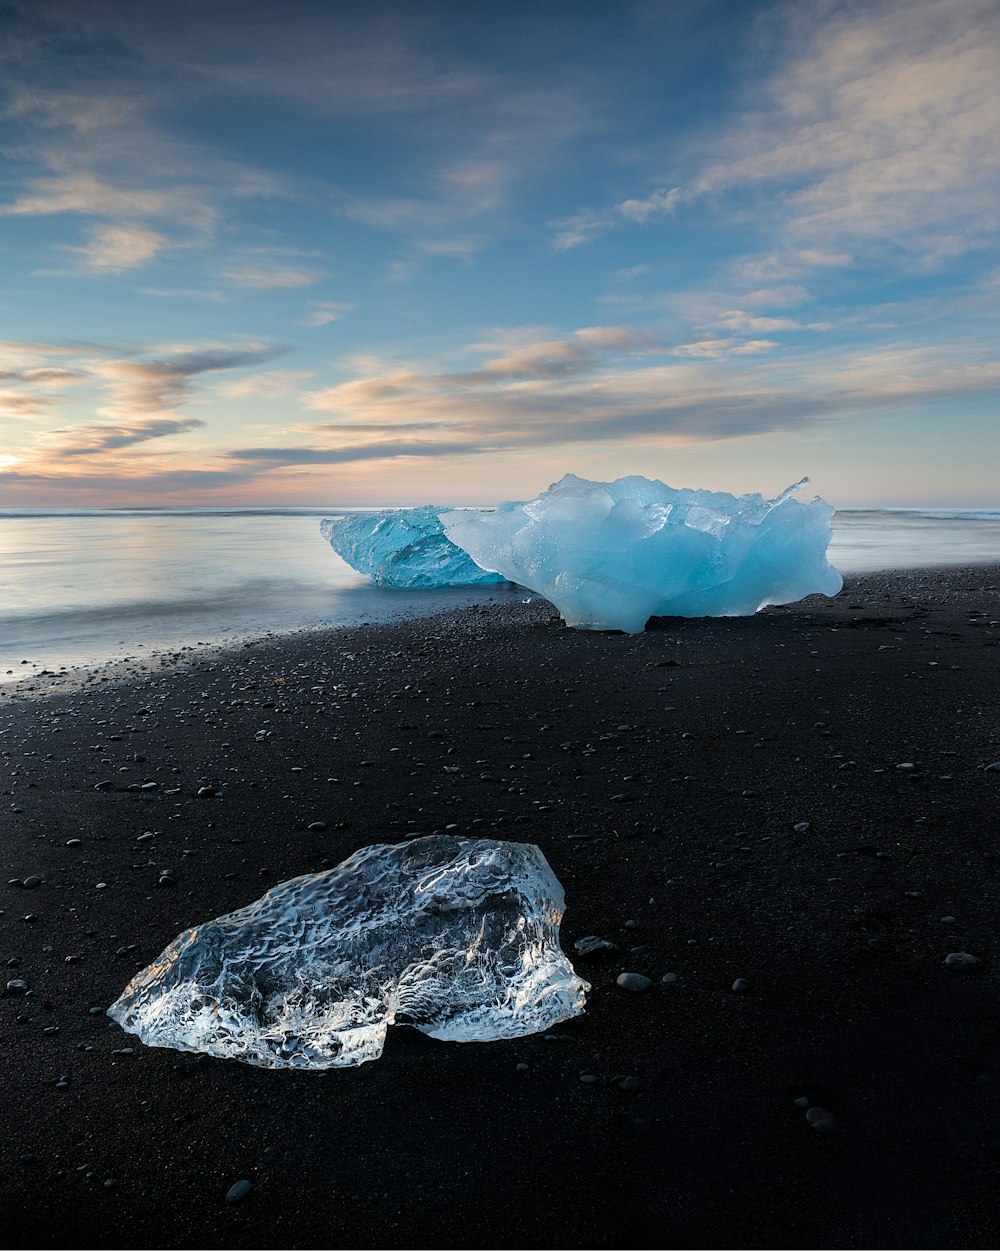 a large iceberg floating on top of a sandy beach